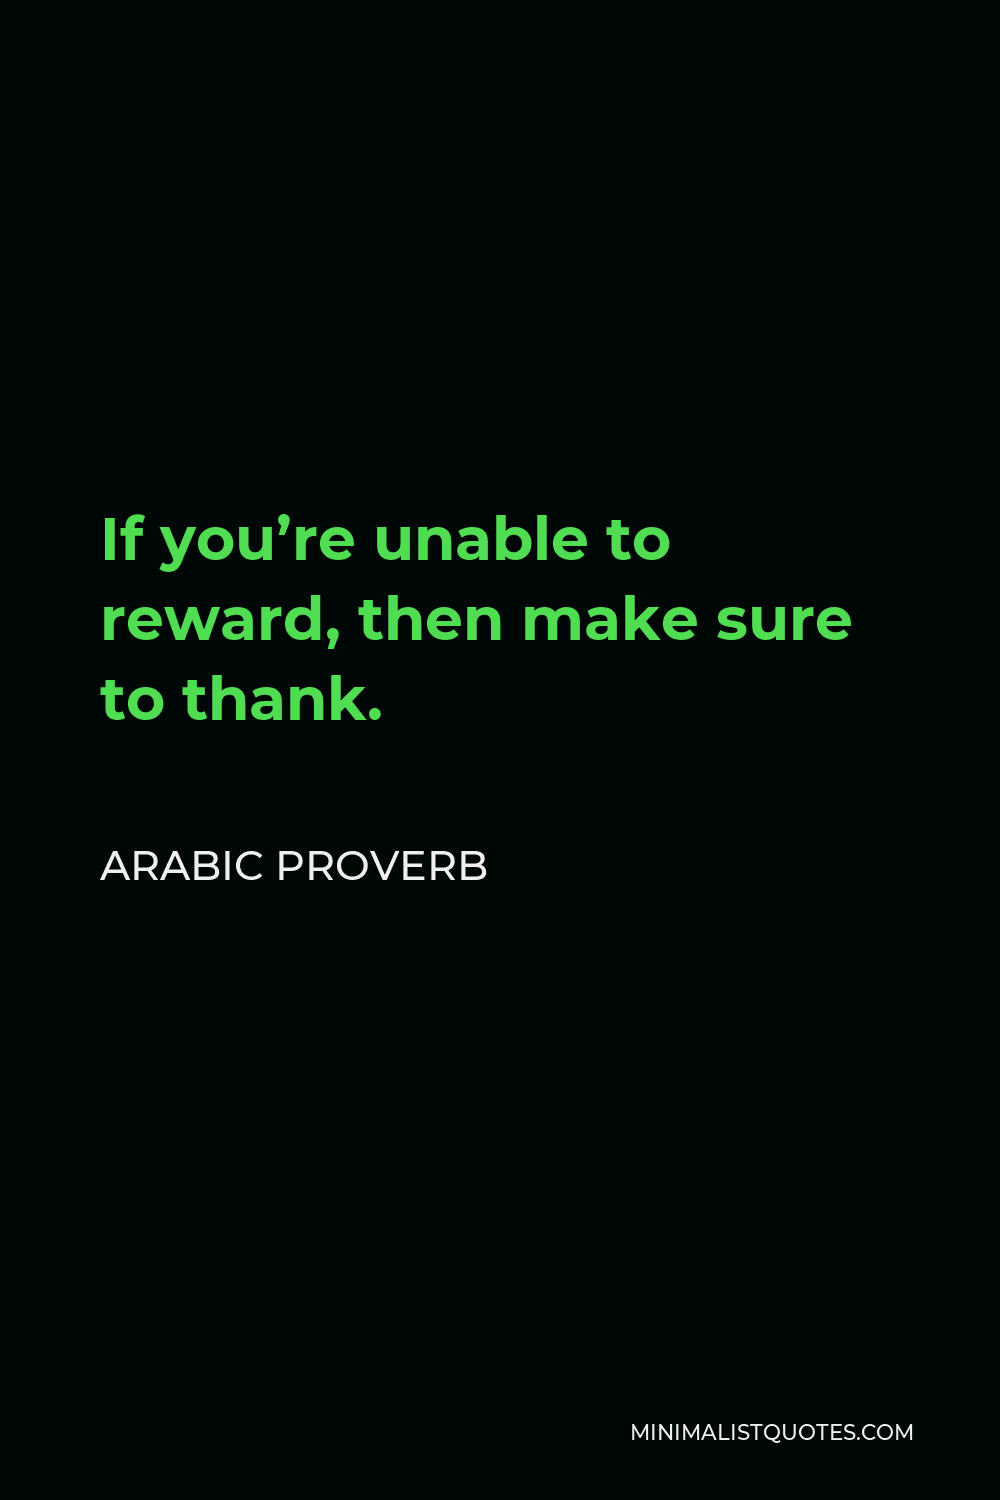 Arabic Proverb Quote - If you’re unable to reward, then make sure to thank.